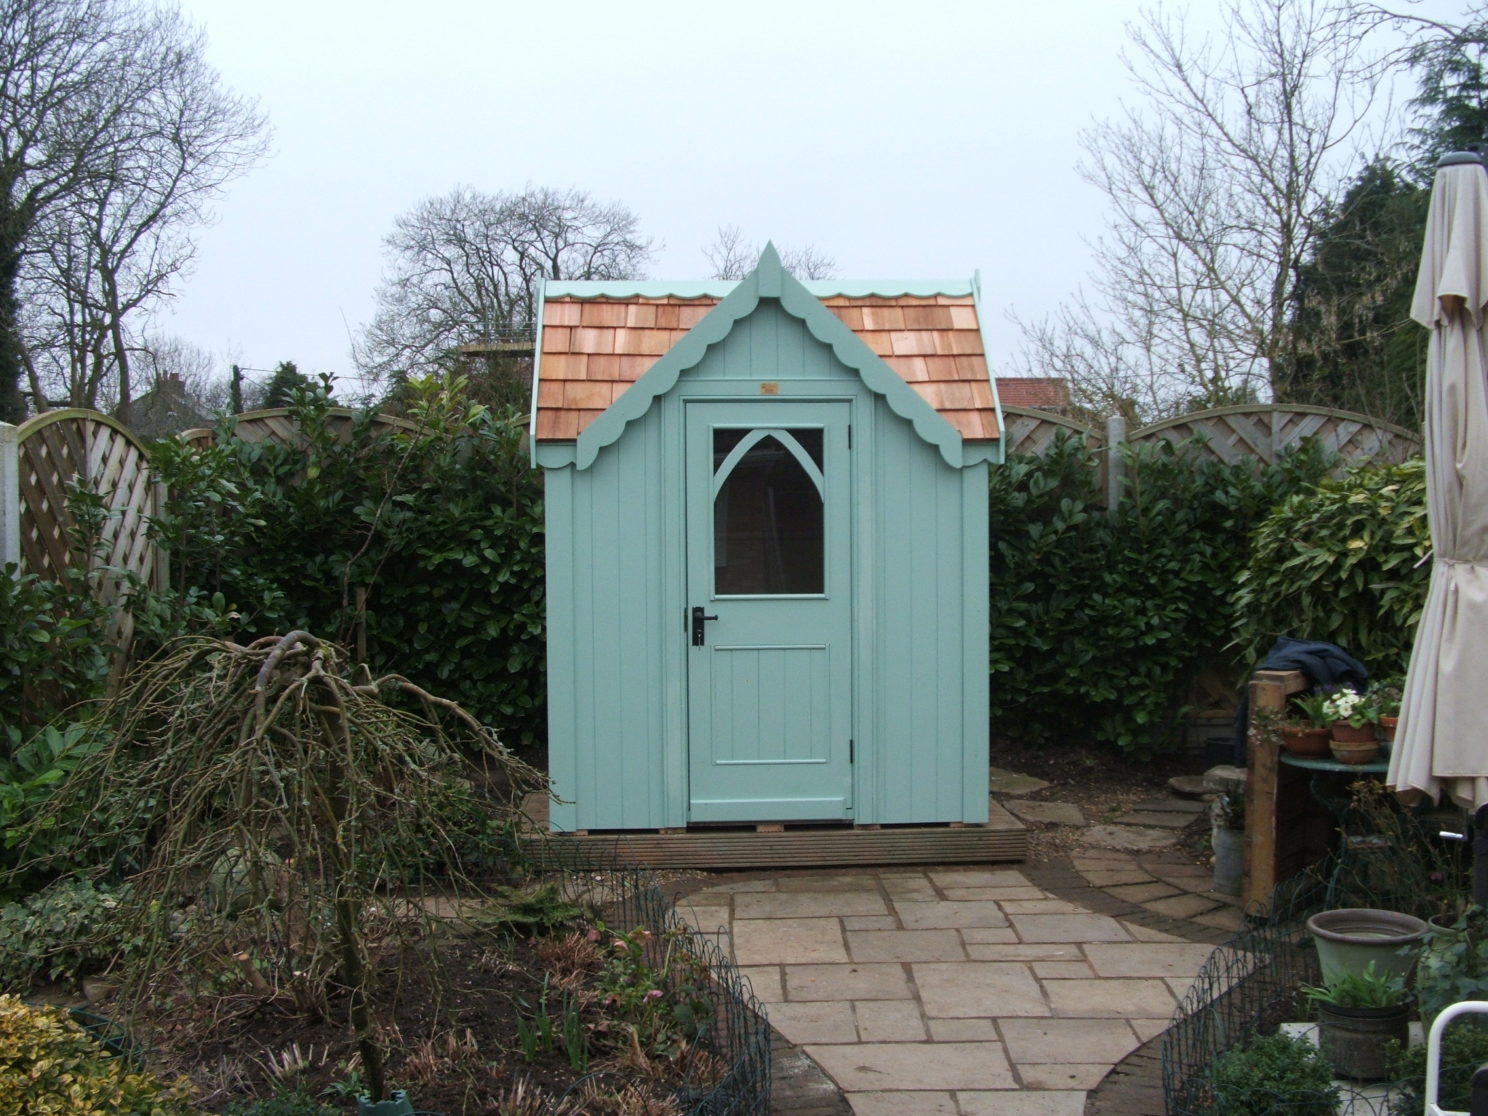 Posh shed with gable over door